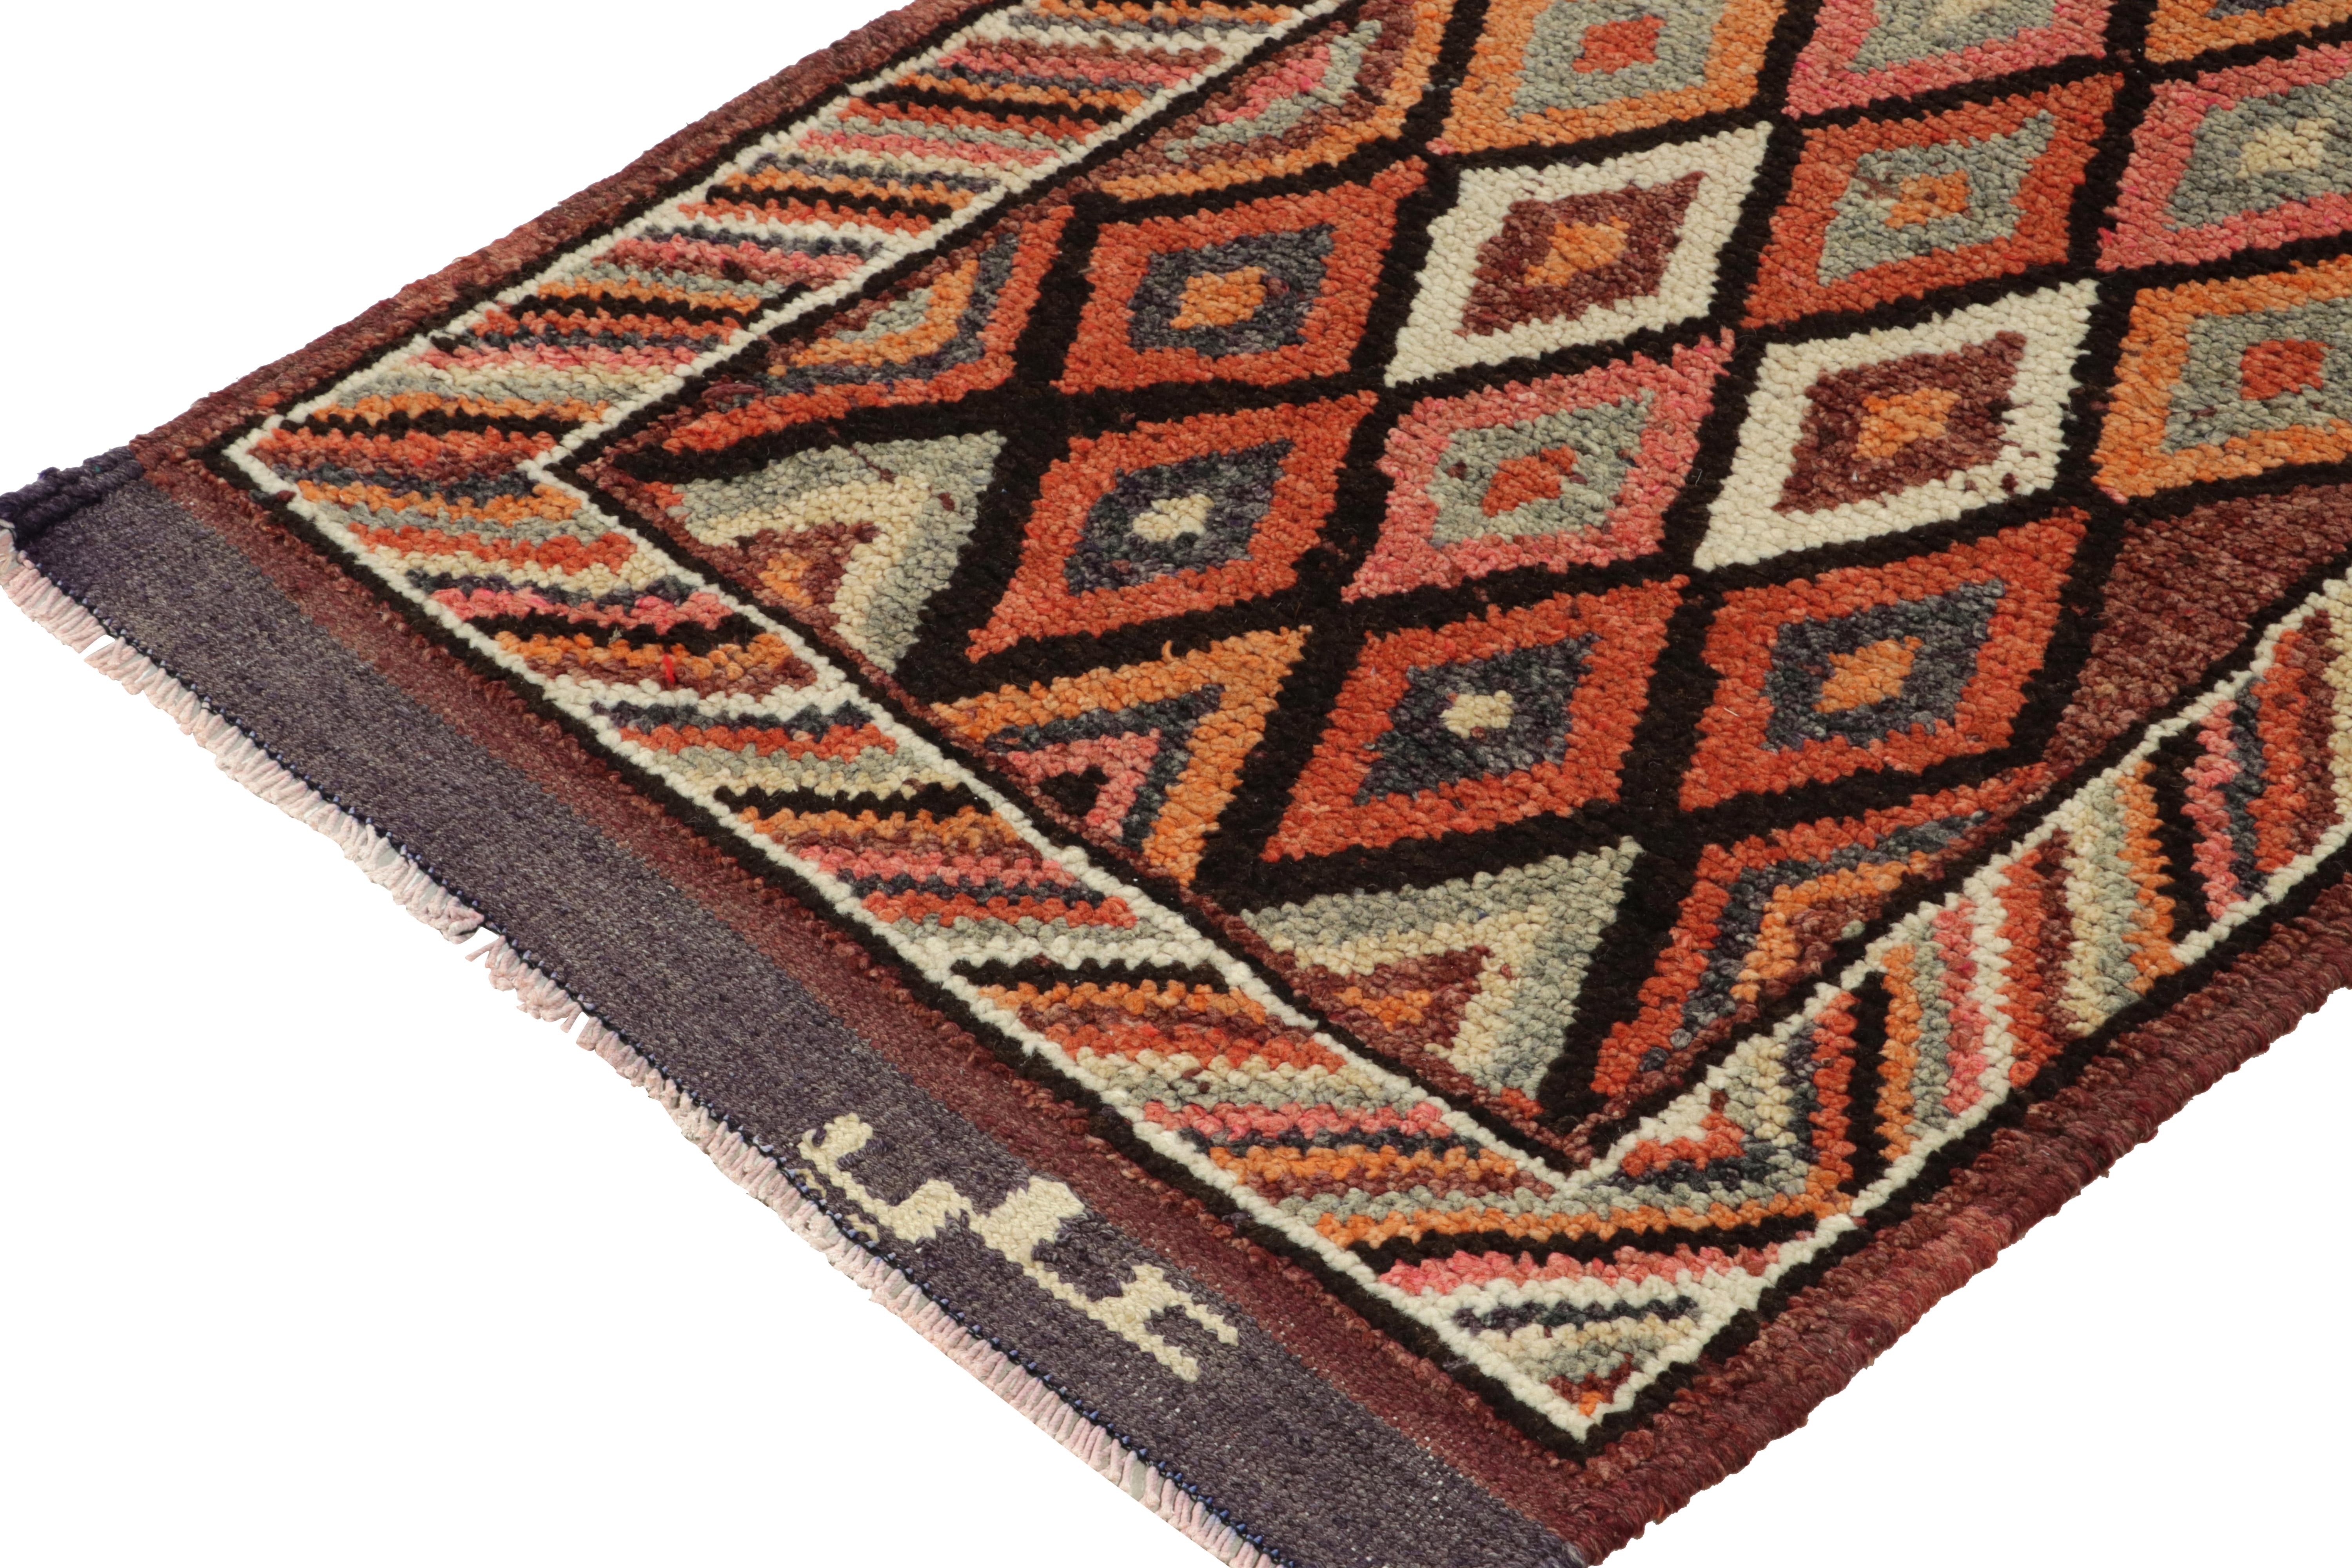 1950s Vintage Tribal runner in Multicolor Patterns, Geometric by Rug & Kilim In Good Condition For Sale In Long Island City, NY